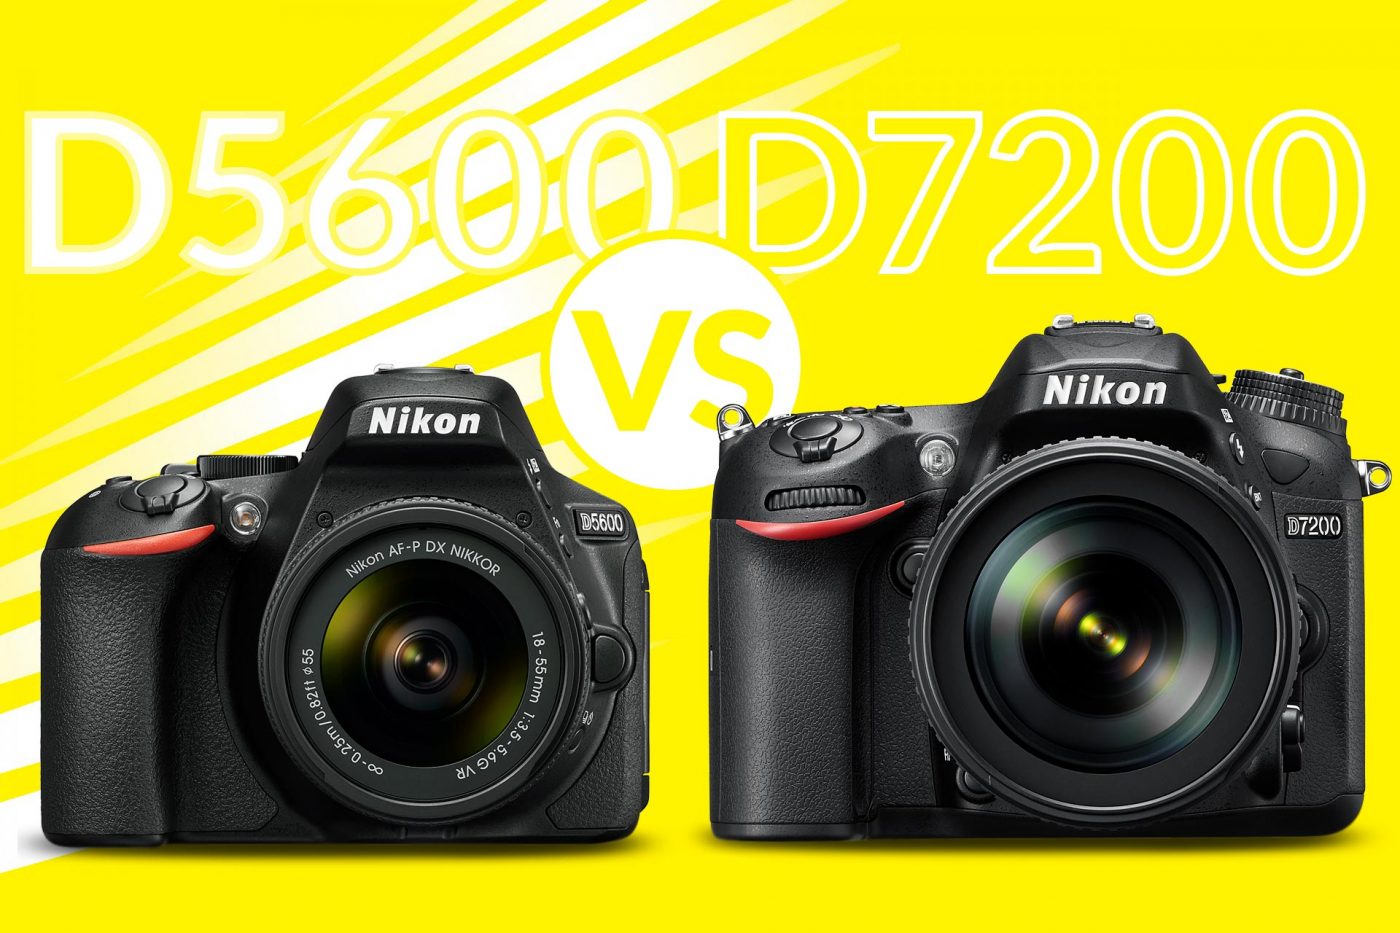 Nikon D5600 vs D7200: Which Should You Buy? - Light And Matter